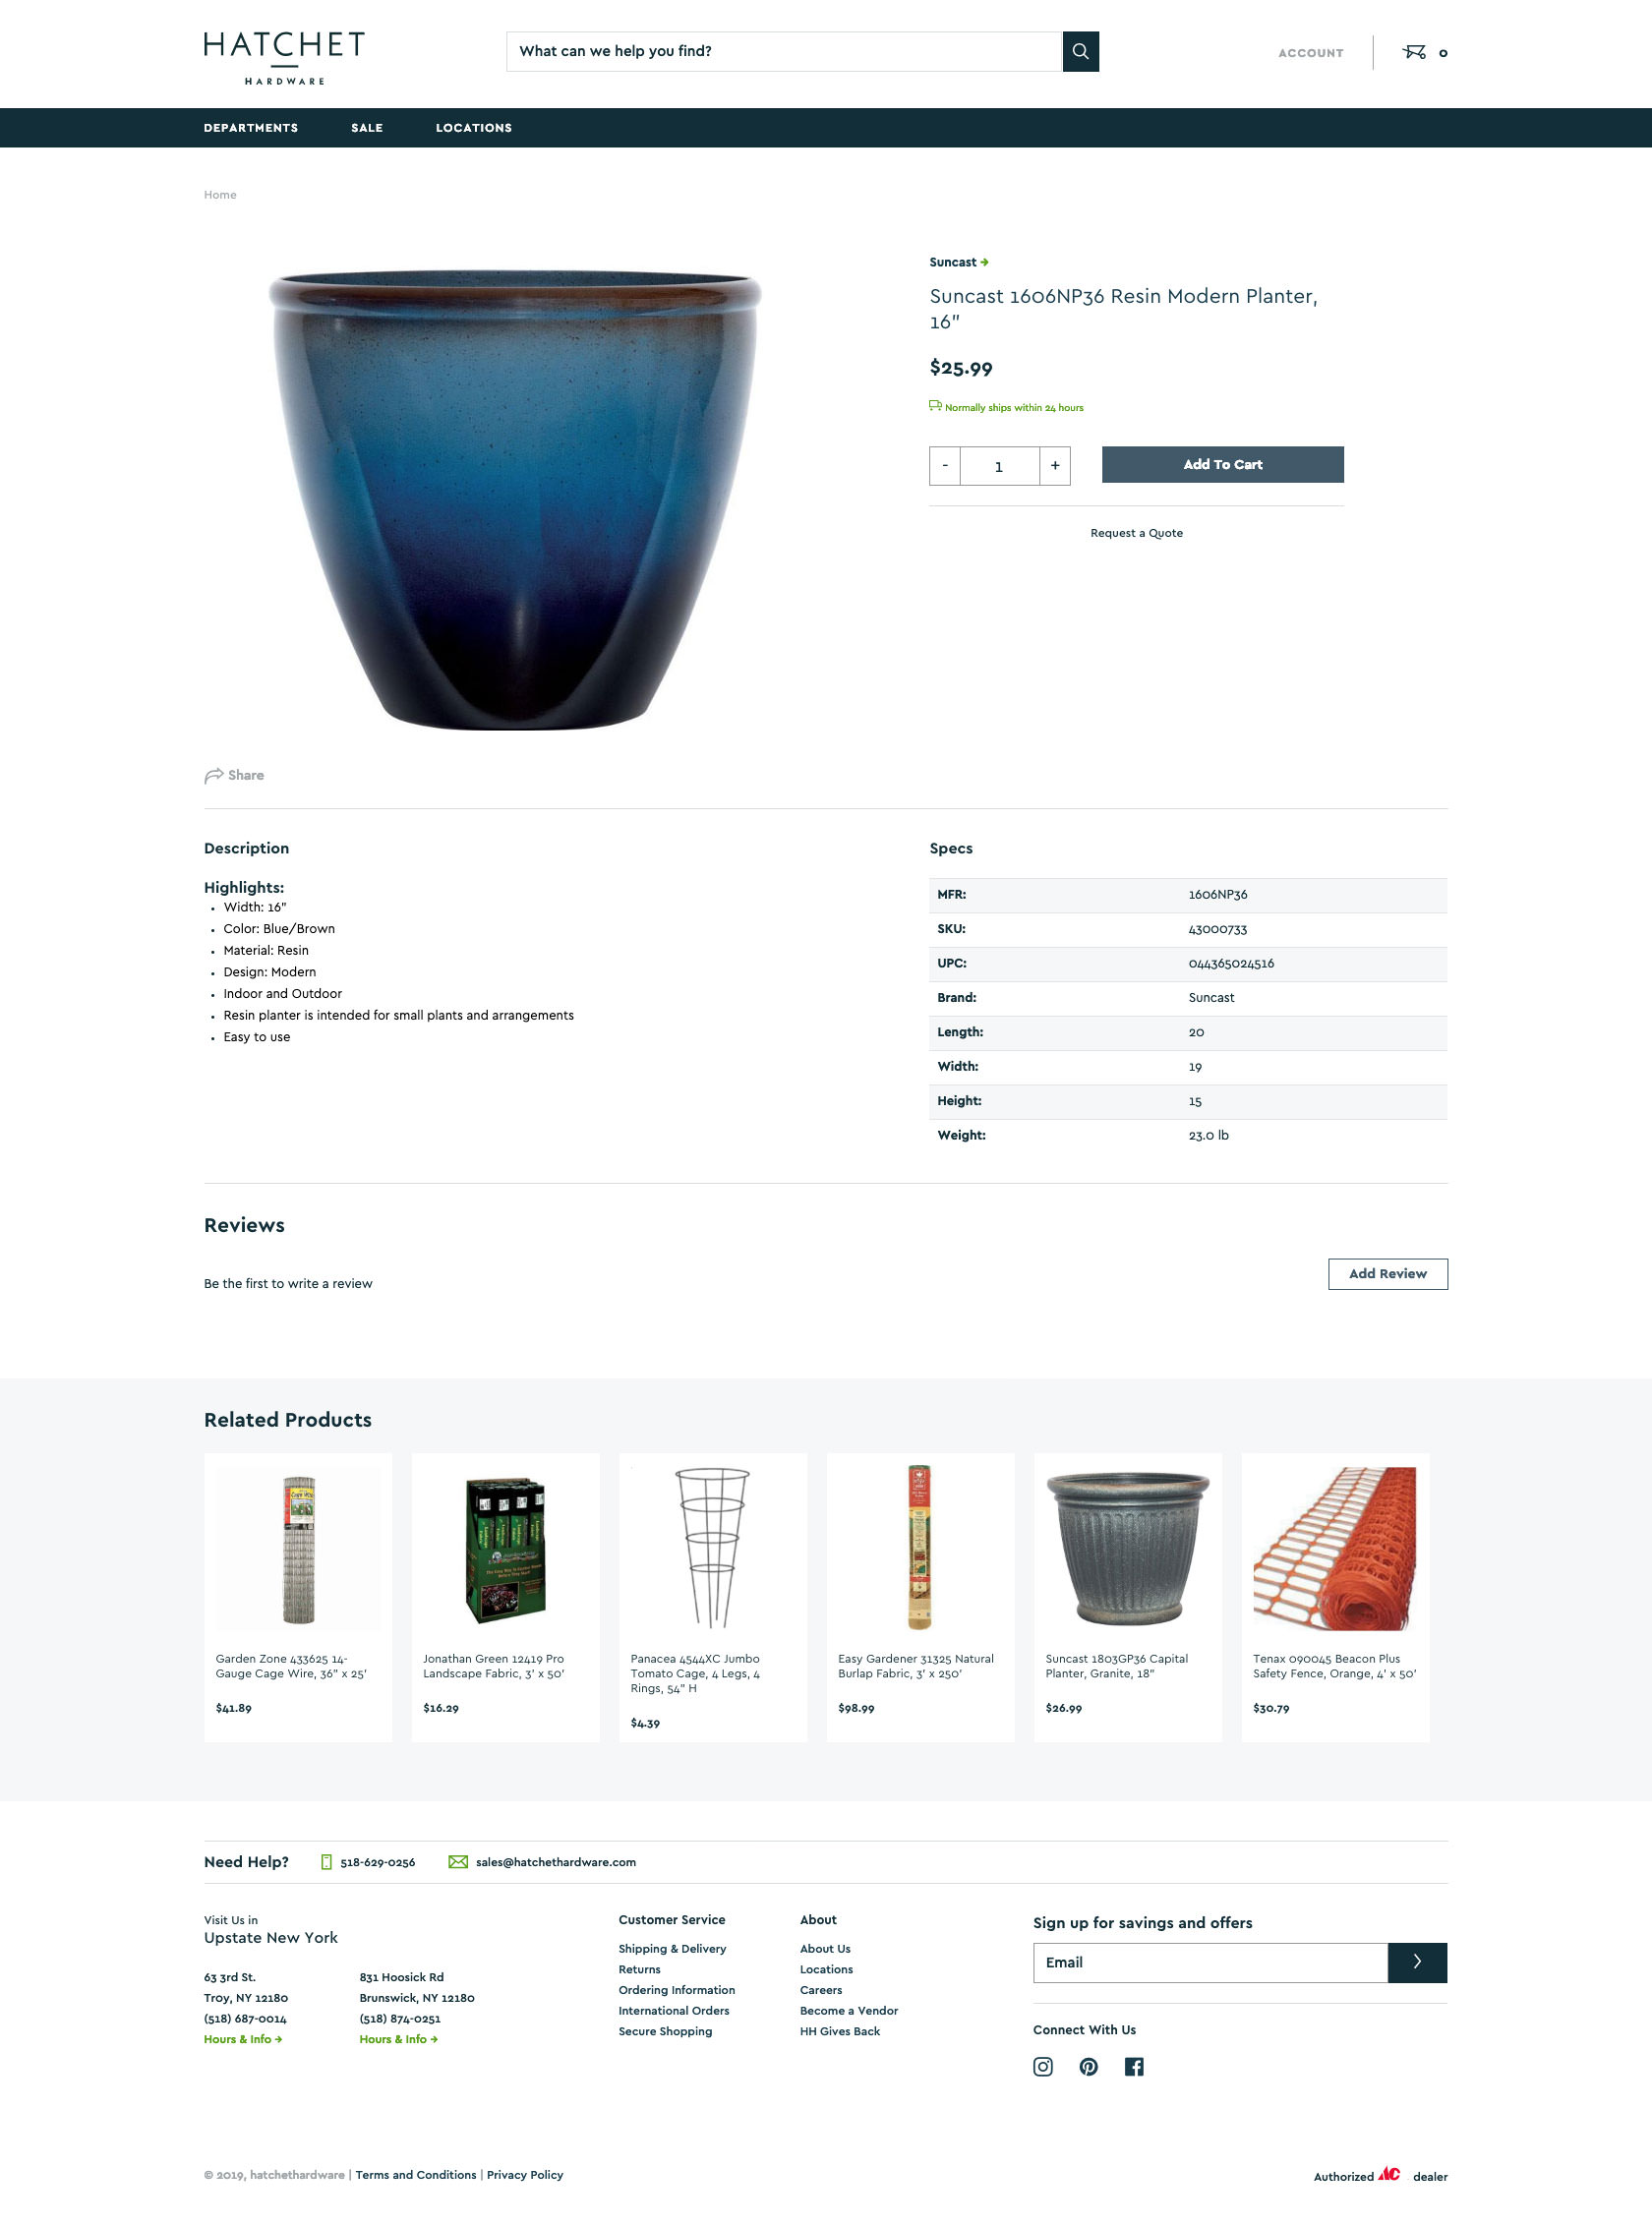 A screenshot of a product page from Hatchet Hardware for desktop